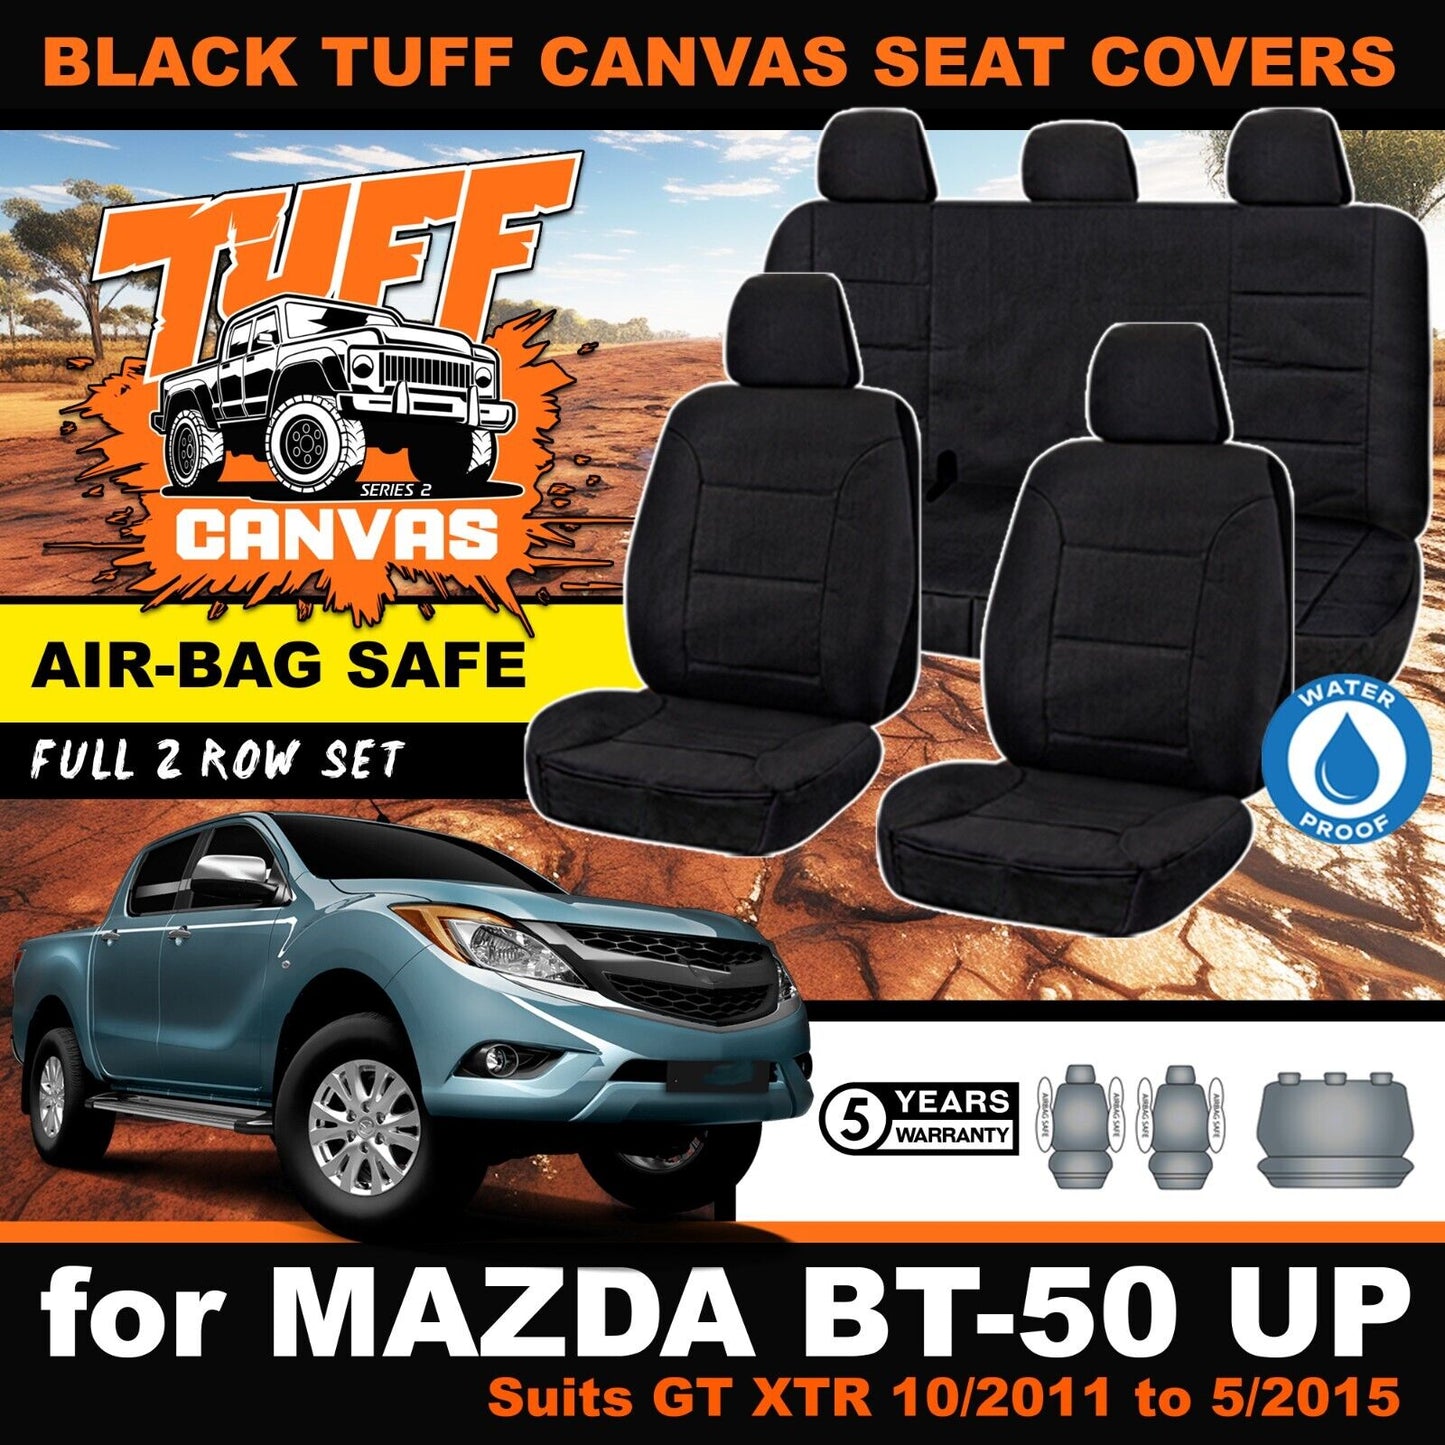 Black Tuff Canvas S2 Seat Covers 2 Rows For Mazda BT-50 Dual Cab XT XTR 11/2011-9/2015